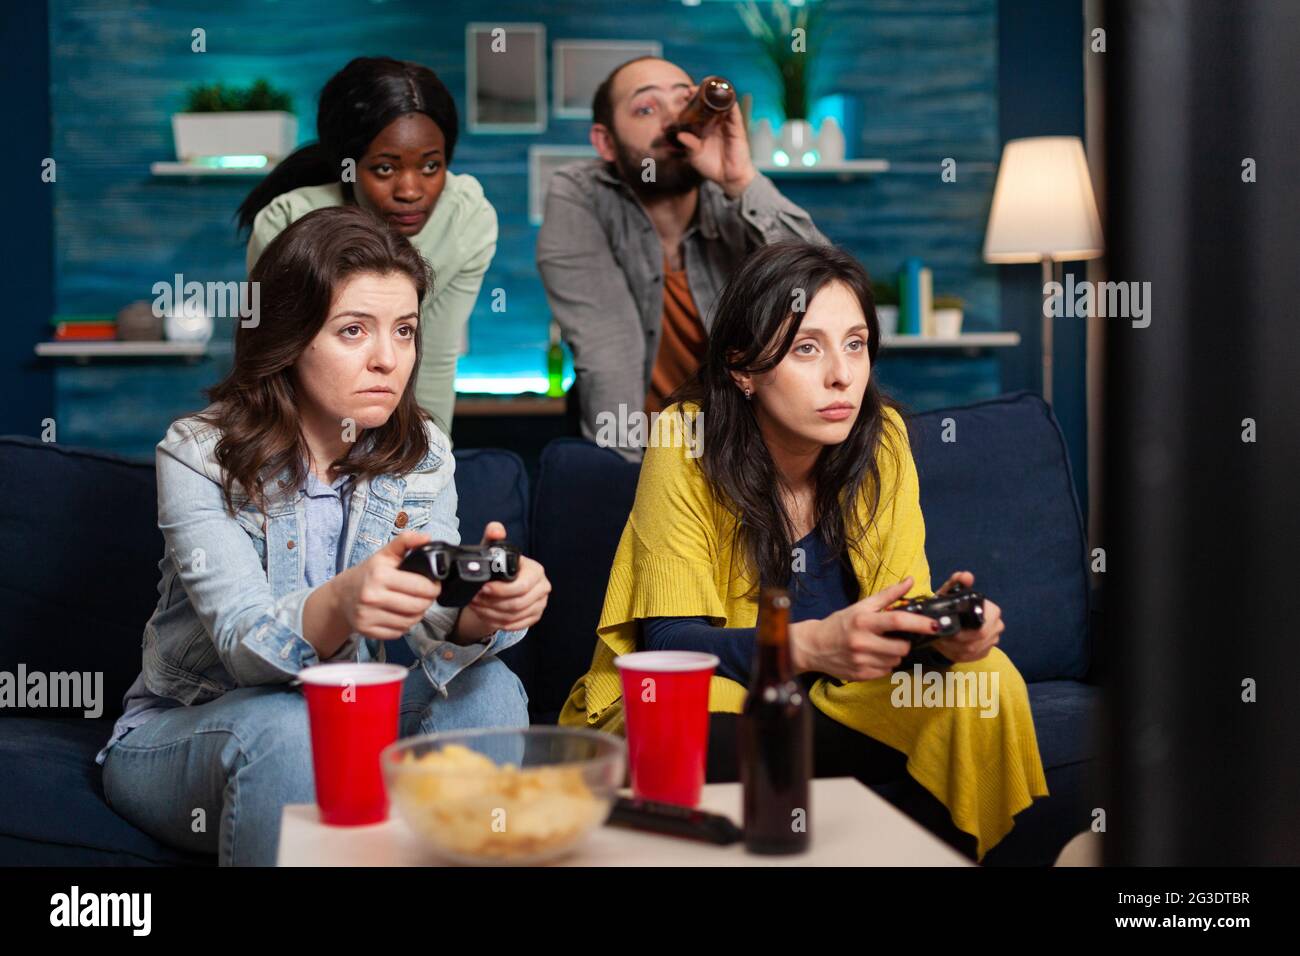 Multi ethinc friends cheerful group of people relaxing on console games with controller. Group of mixed race friends playing games while sitting on sofa in living room late at night. Stock Photo